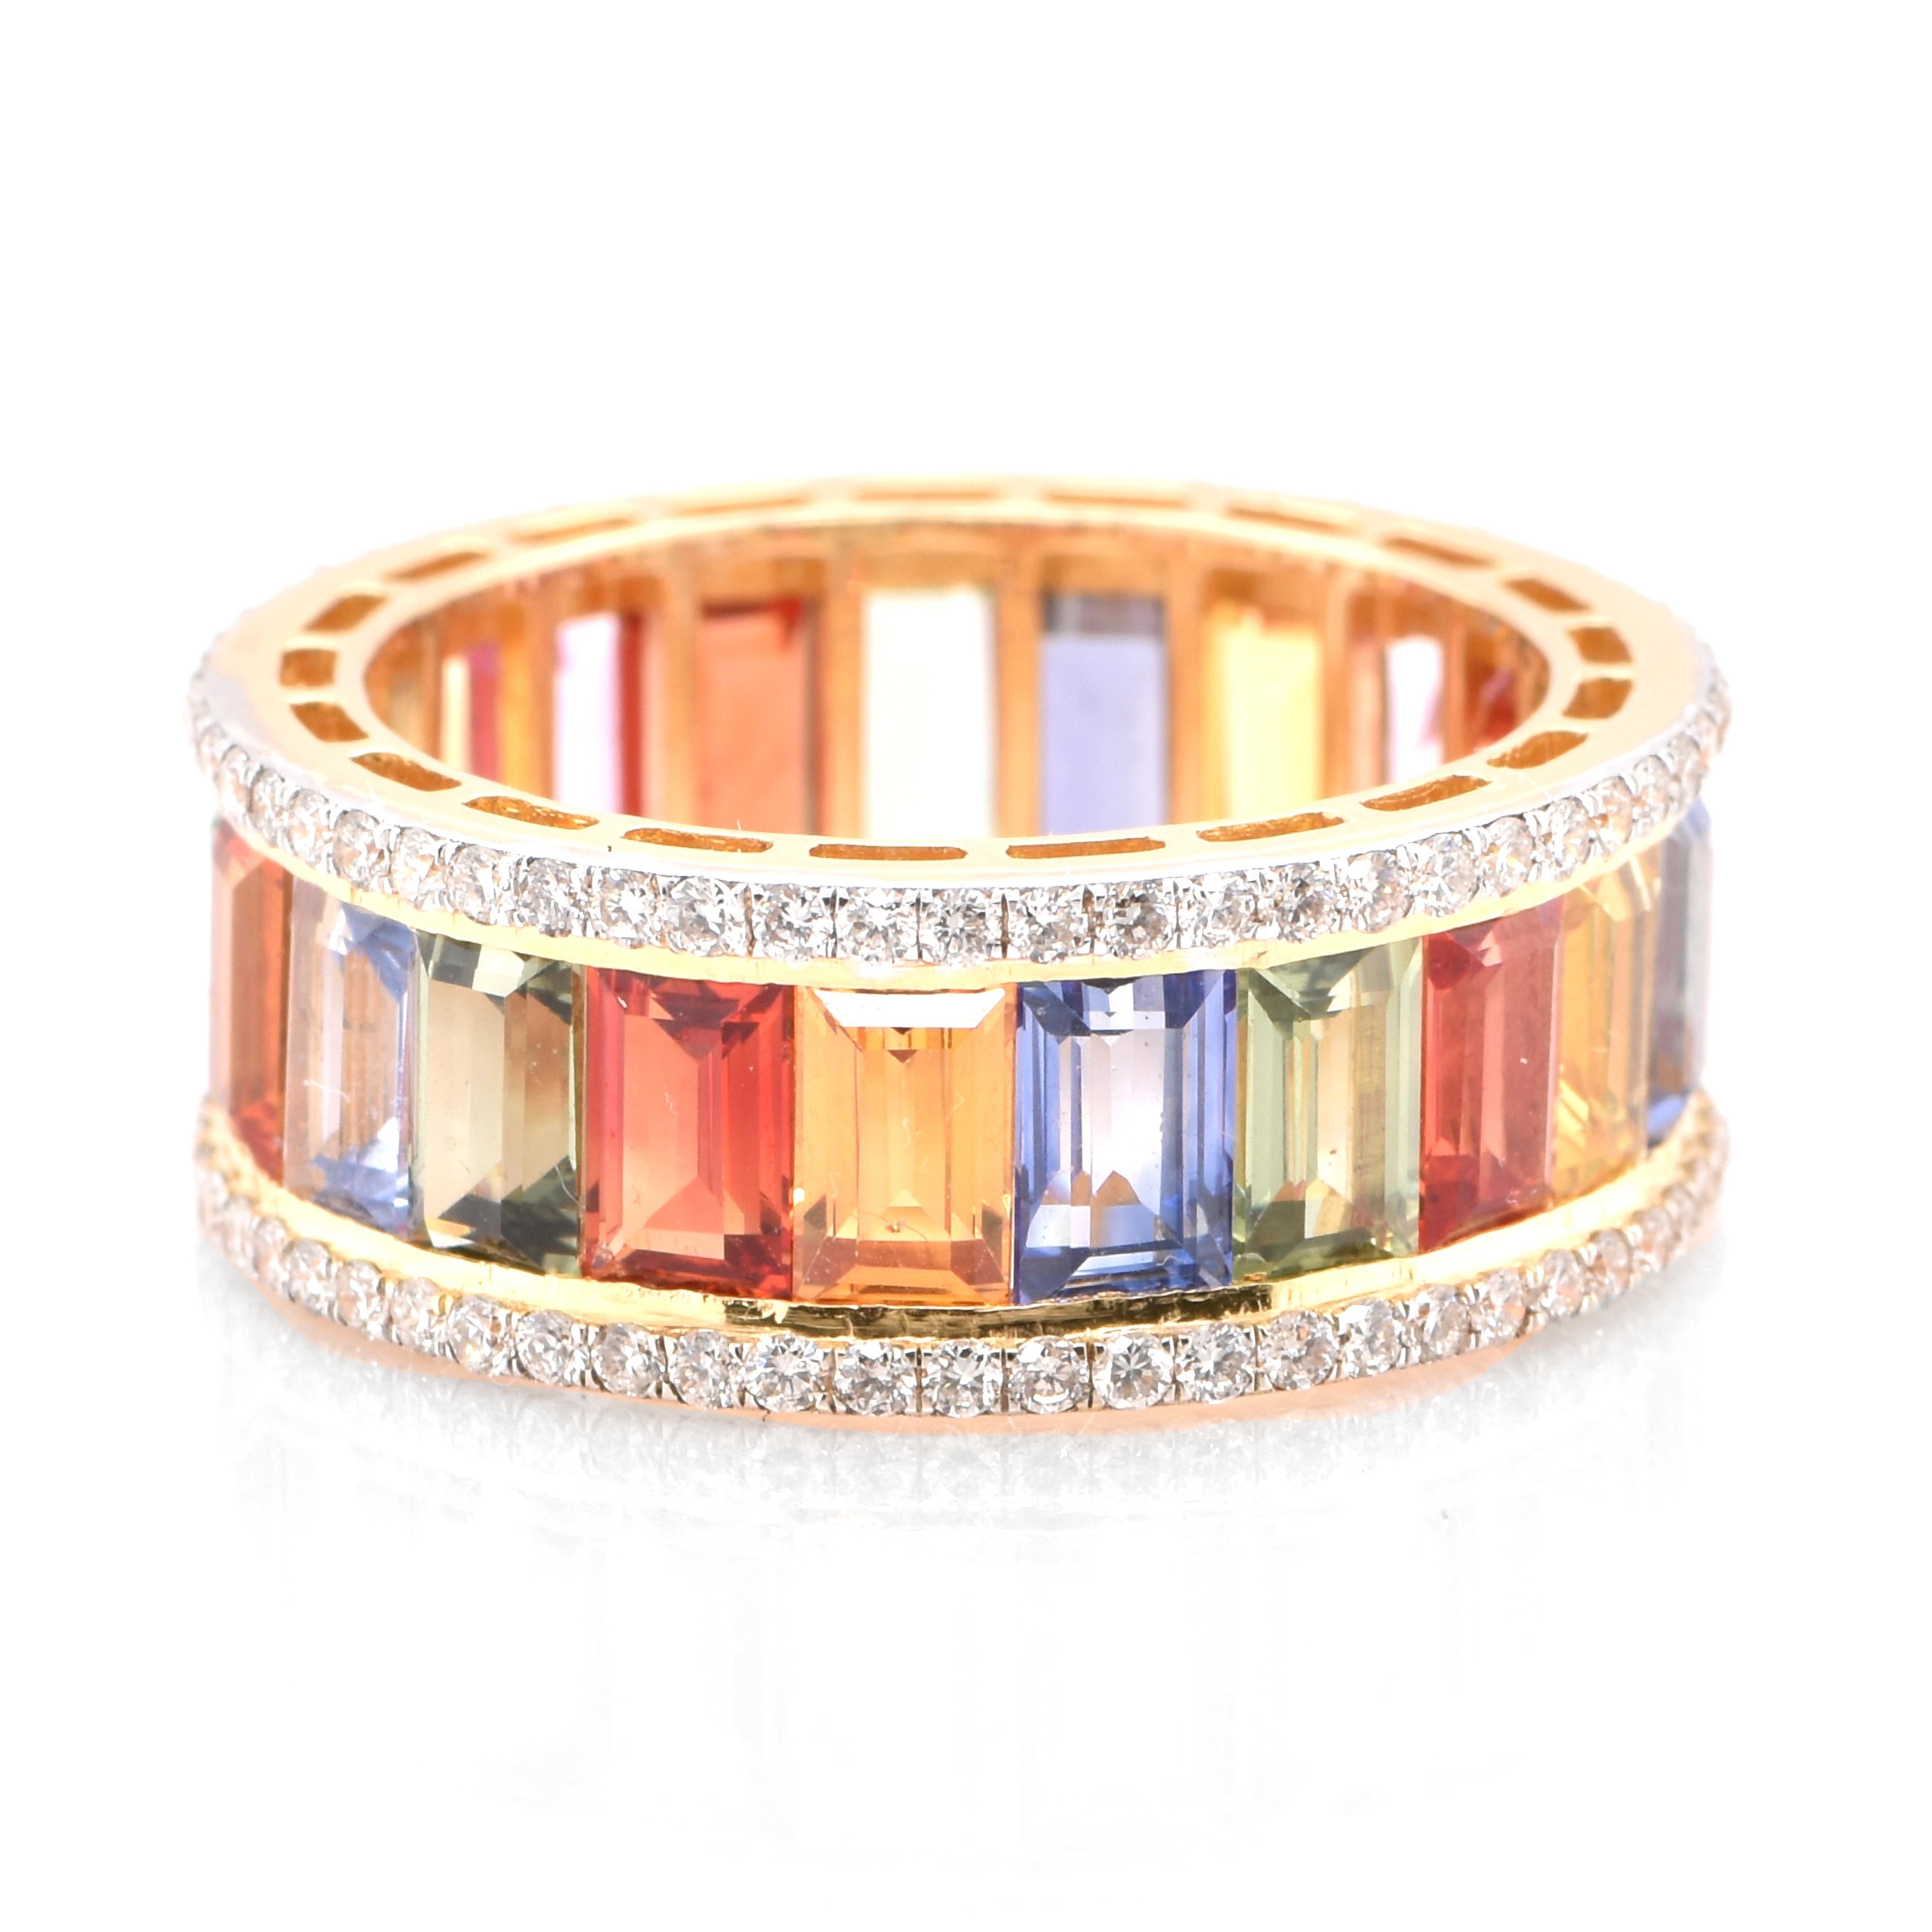 Modern 7.47 Carat Multi Color Sapphire and Diamond Eternity Ring Set in 18 Karat Gold For Sale